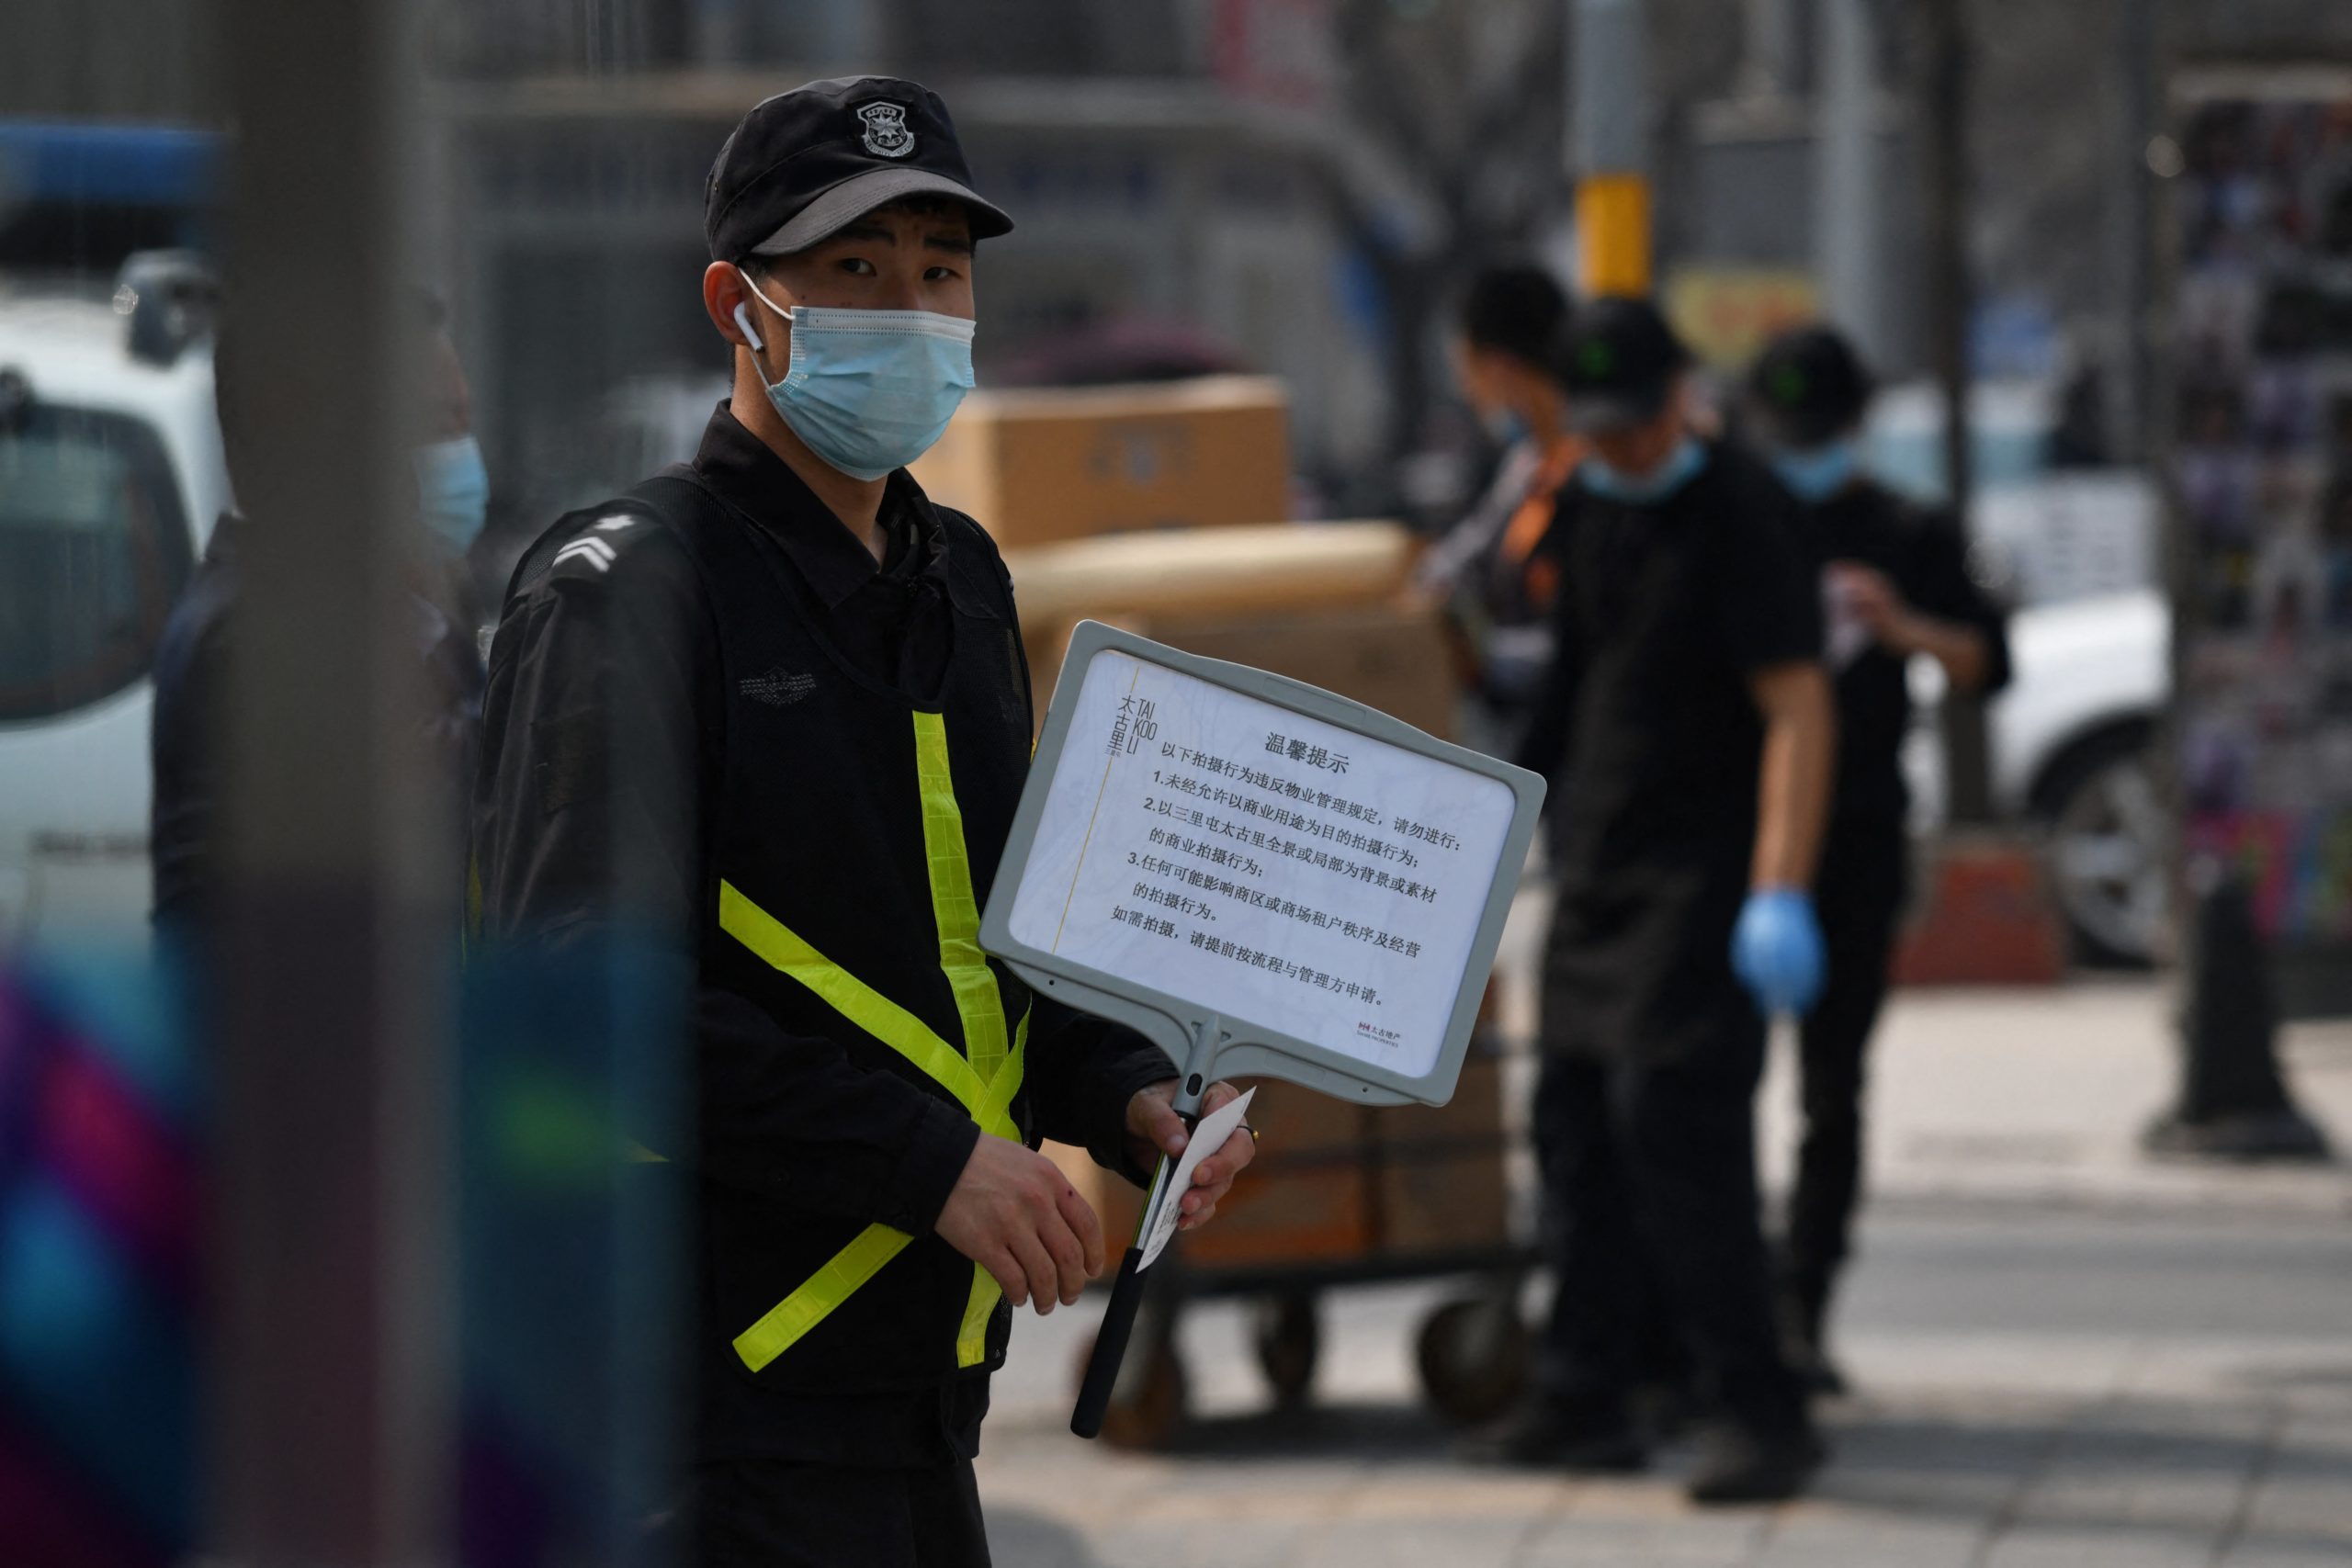 A security guard holds a sign advising that photos are forbidden without permission, outside a store of Swedish clothing giant H&M in Beijing on March 25, 2021, (Photo: Greg Baker/AFP, Getty Images)